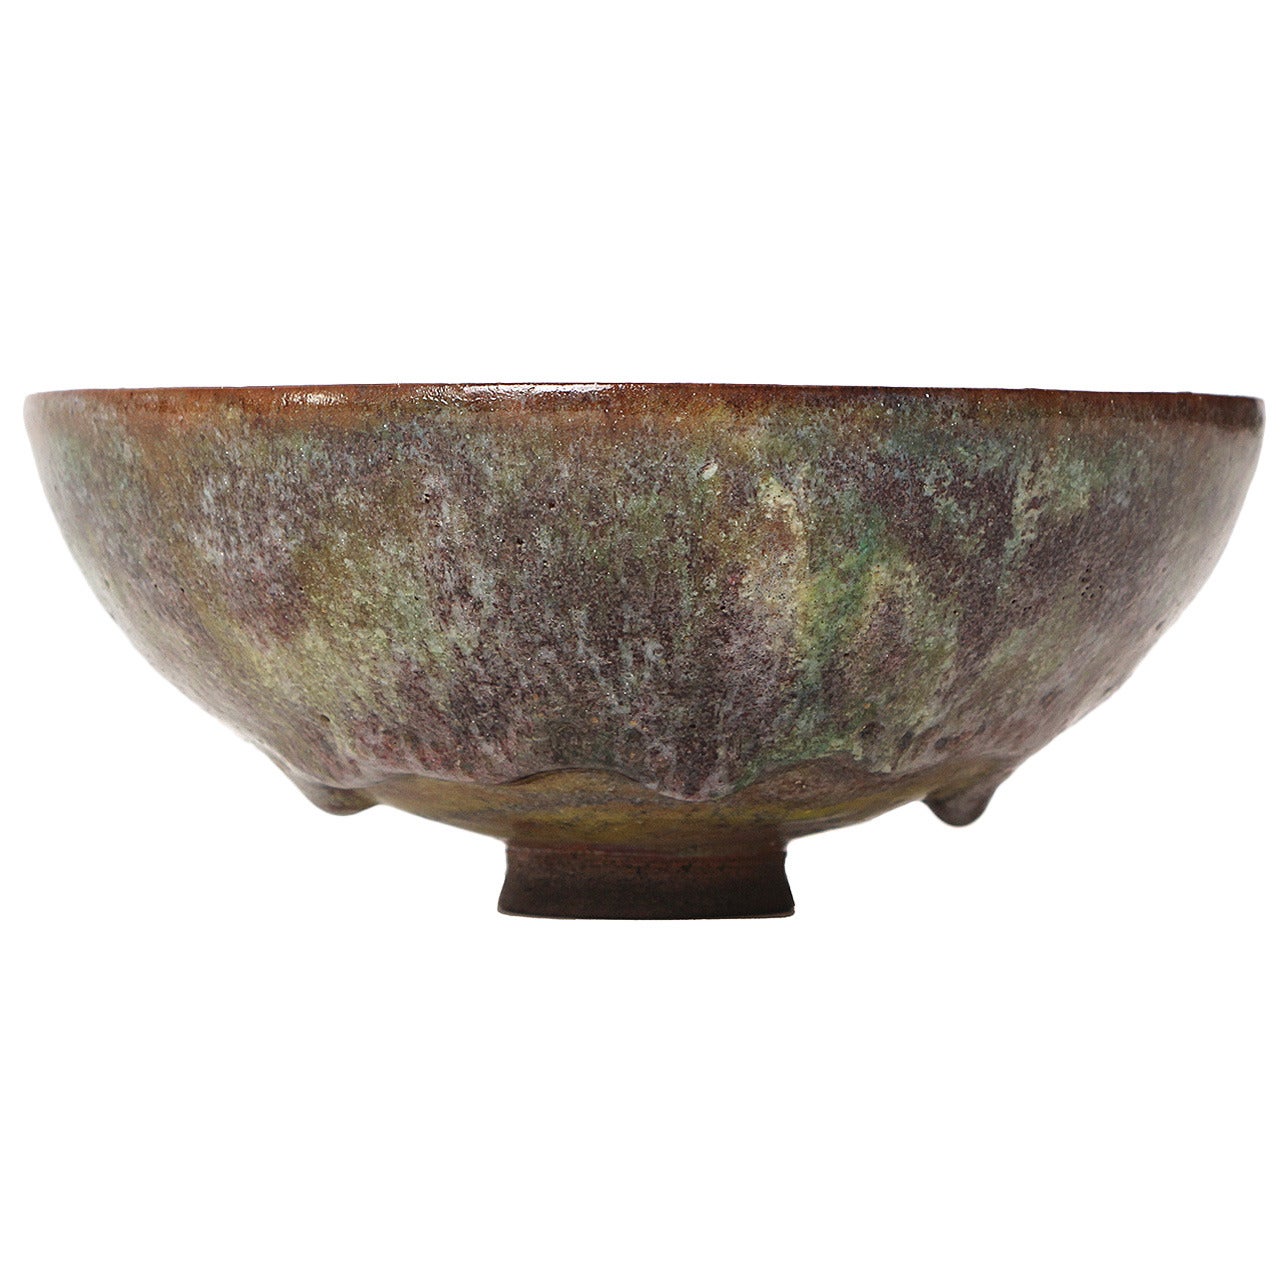 Exceptional Ceramic Bowl By Gertrude and Otto Natzler